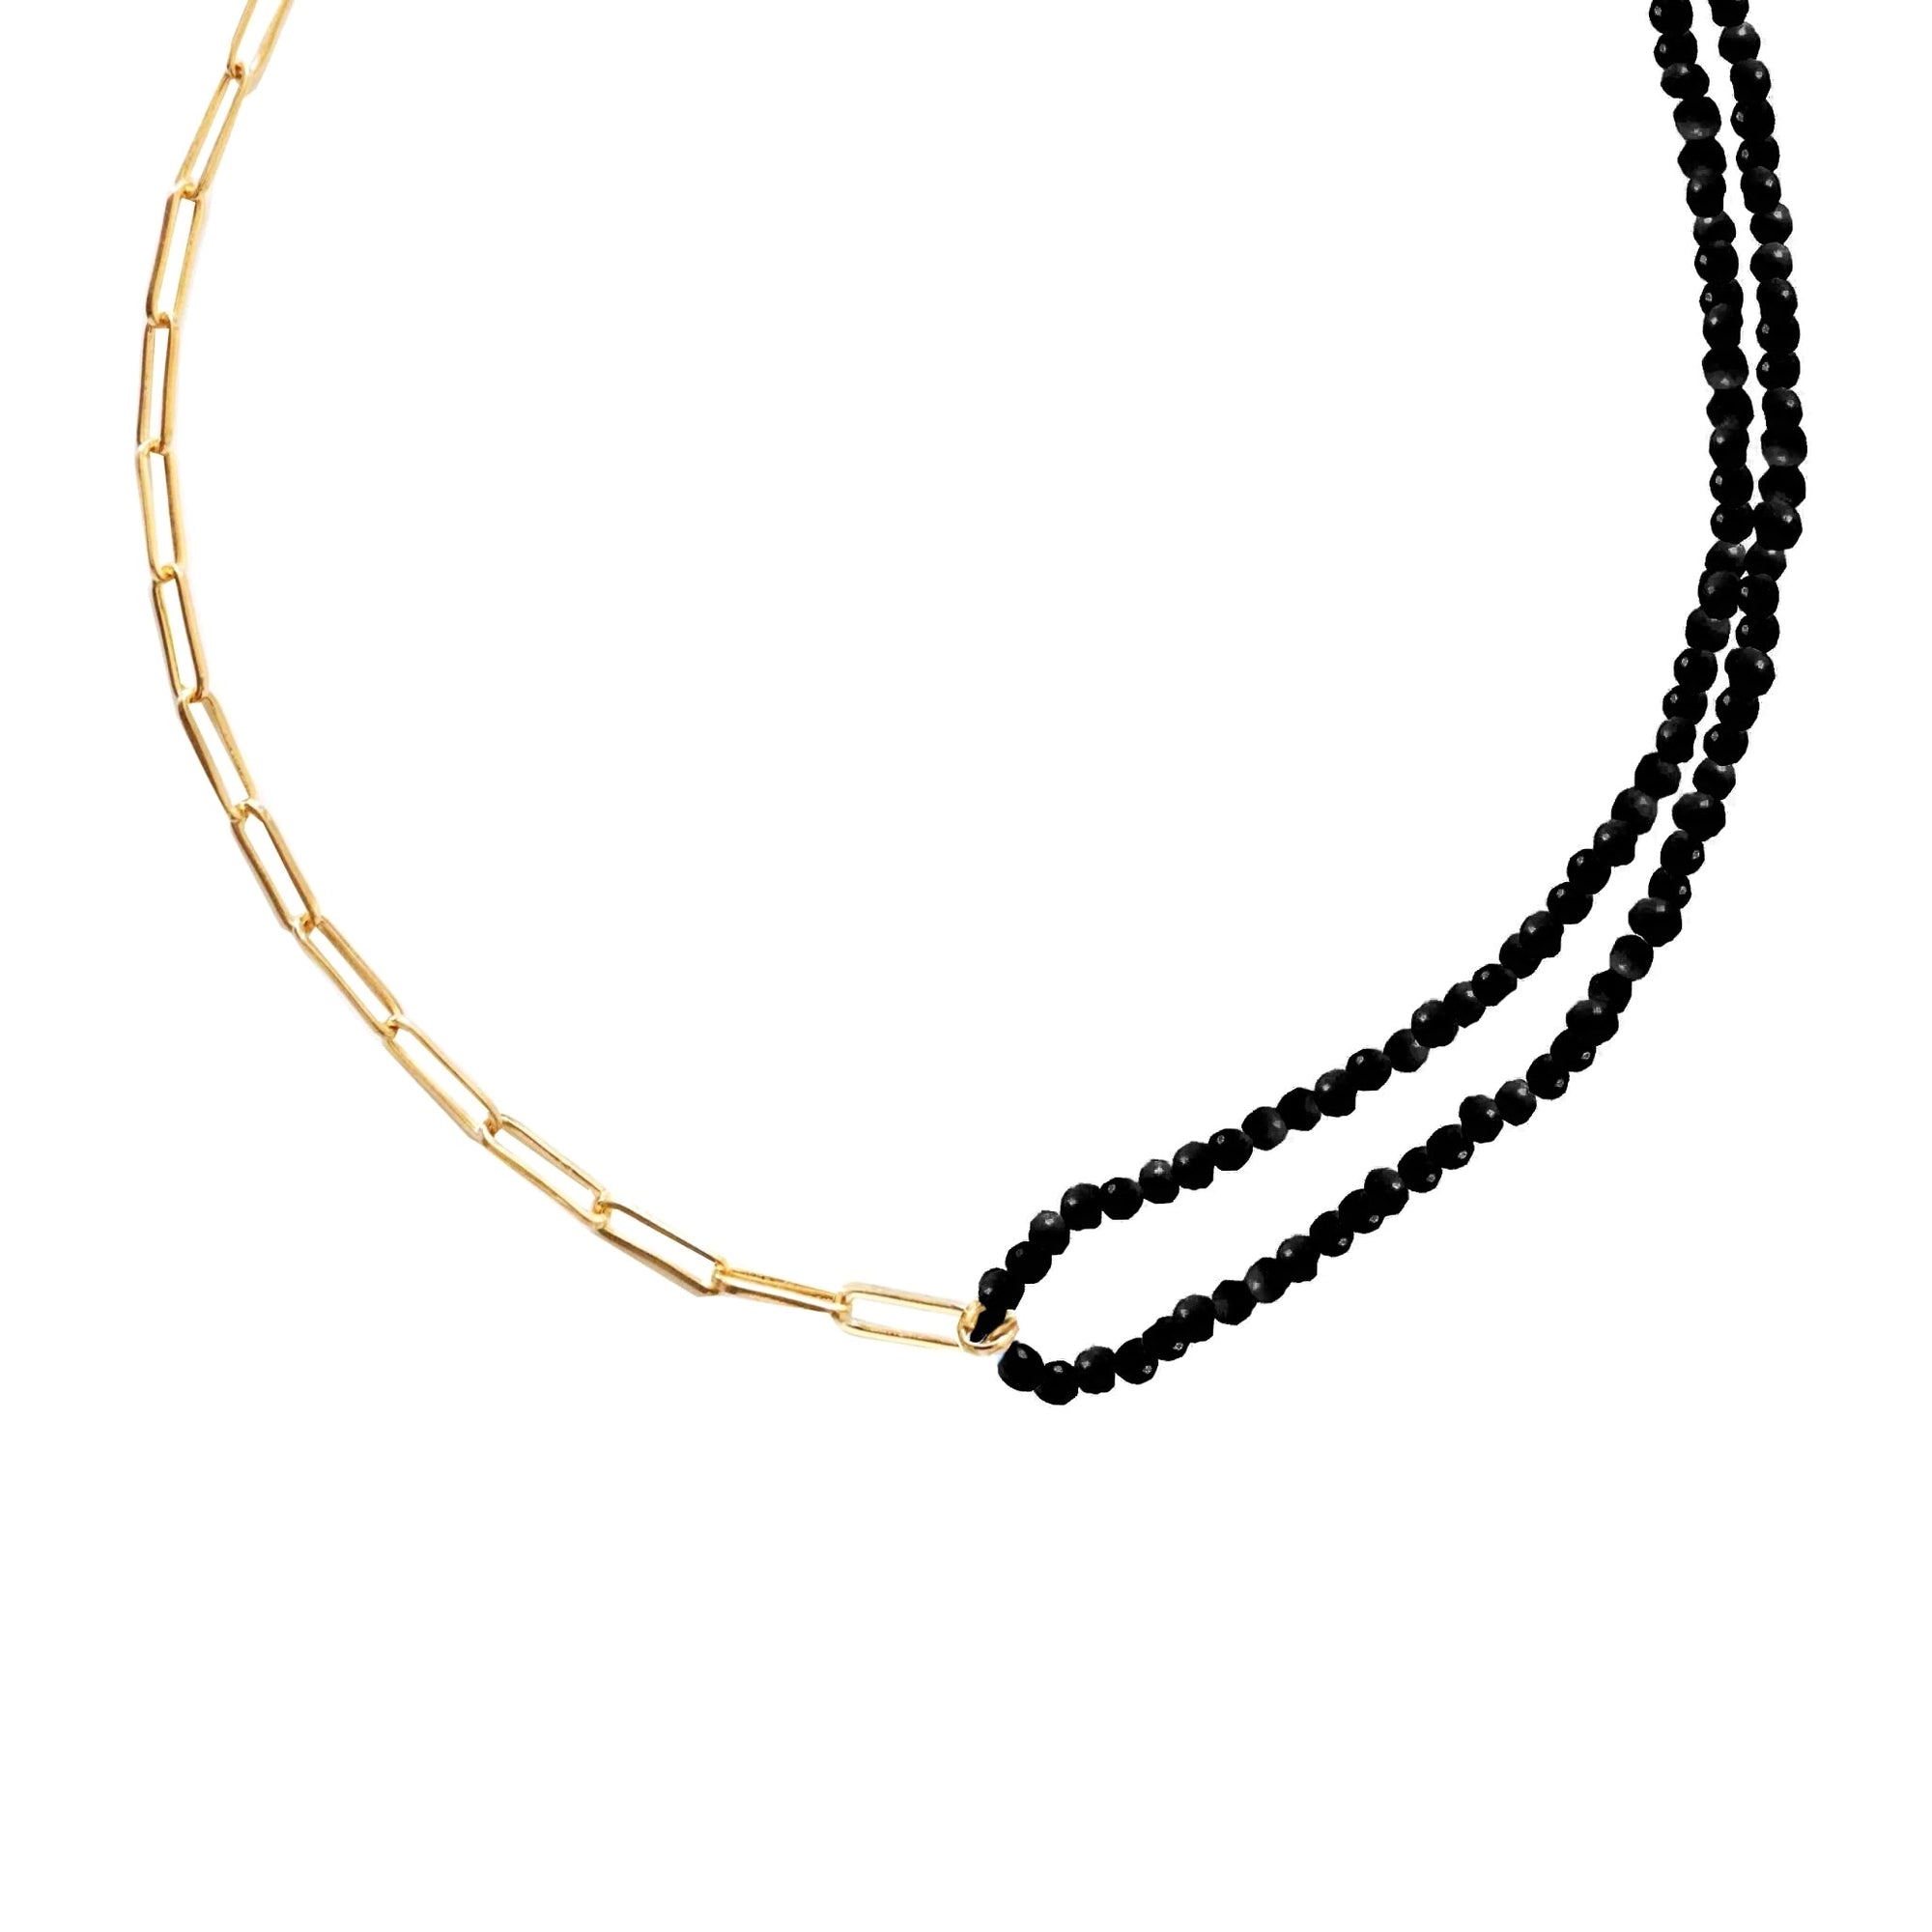 POISE BEADED LINK NECKLACE - BLACK ONYX & GOLD - SO PRETTY CARA COTTER